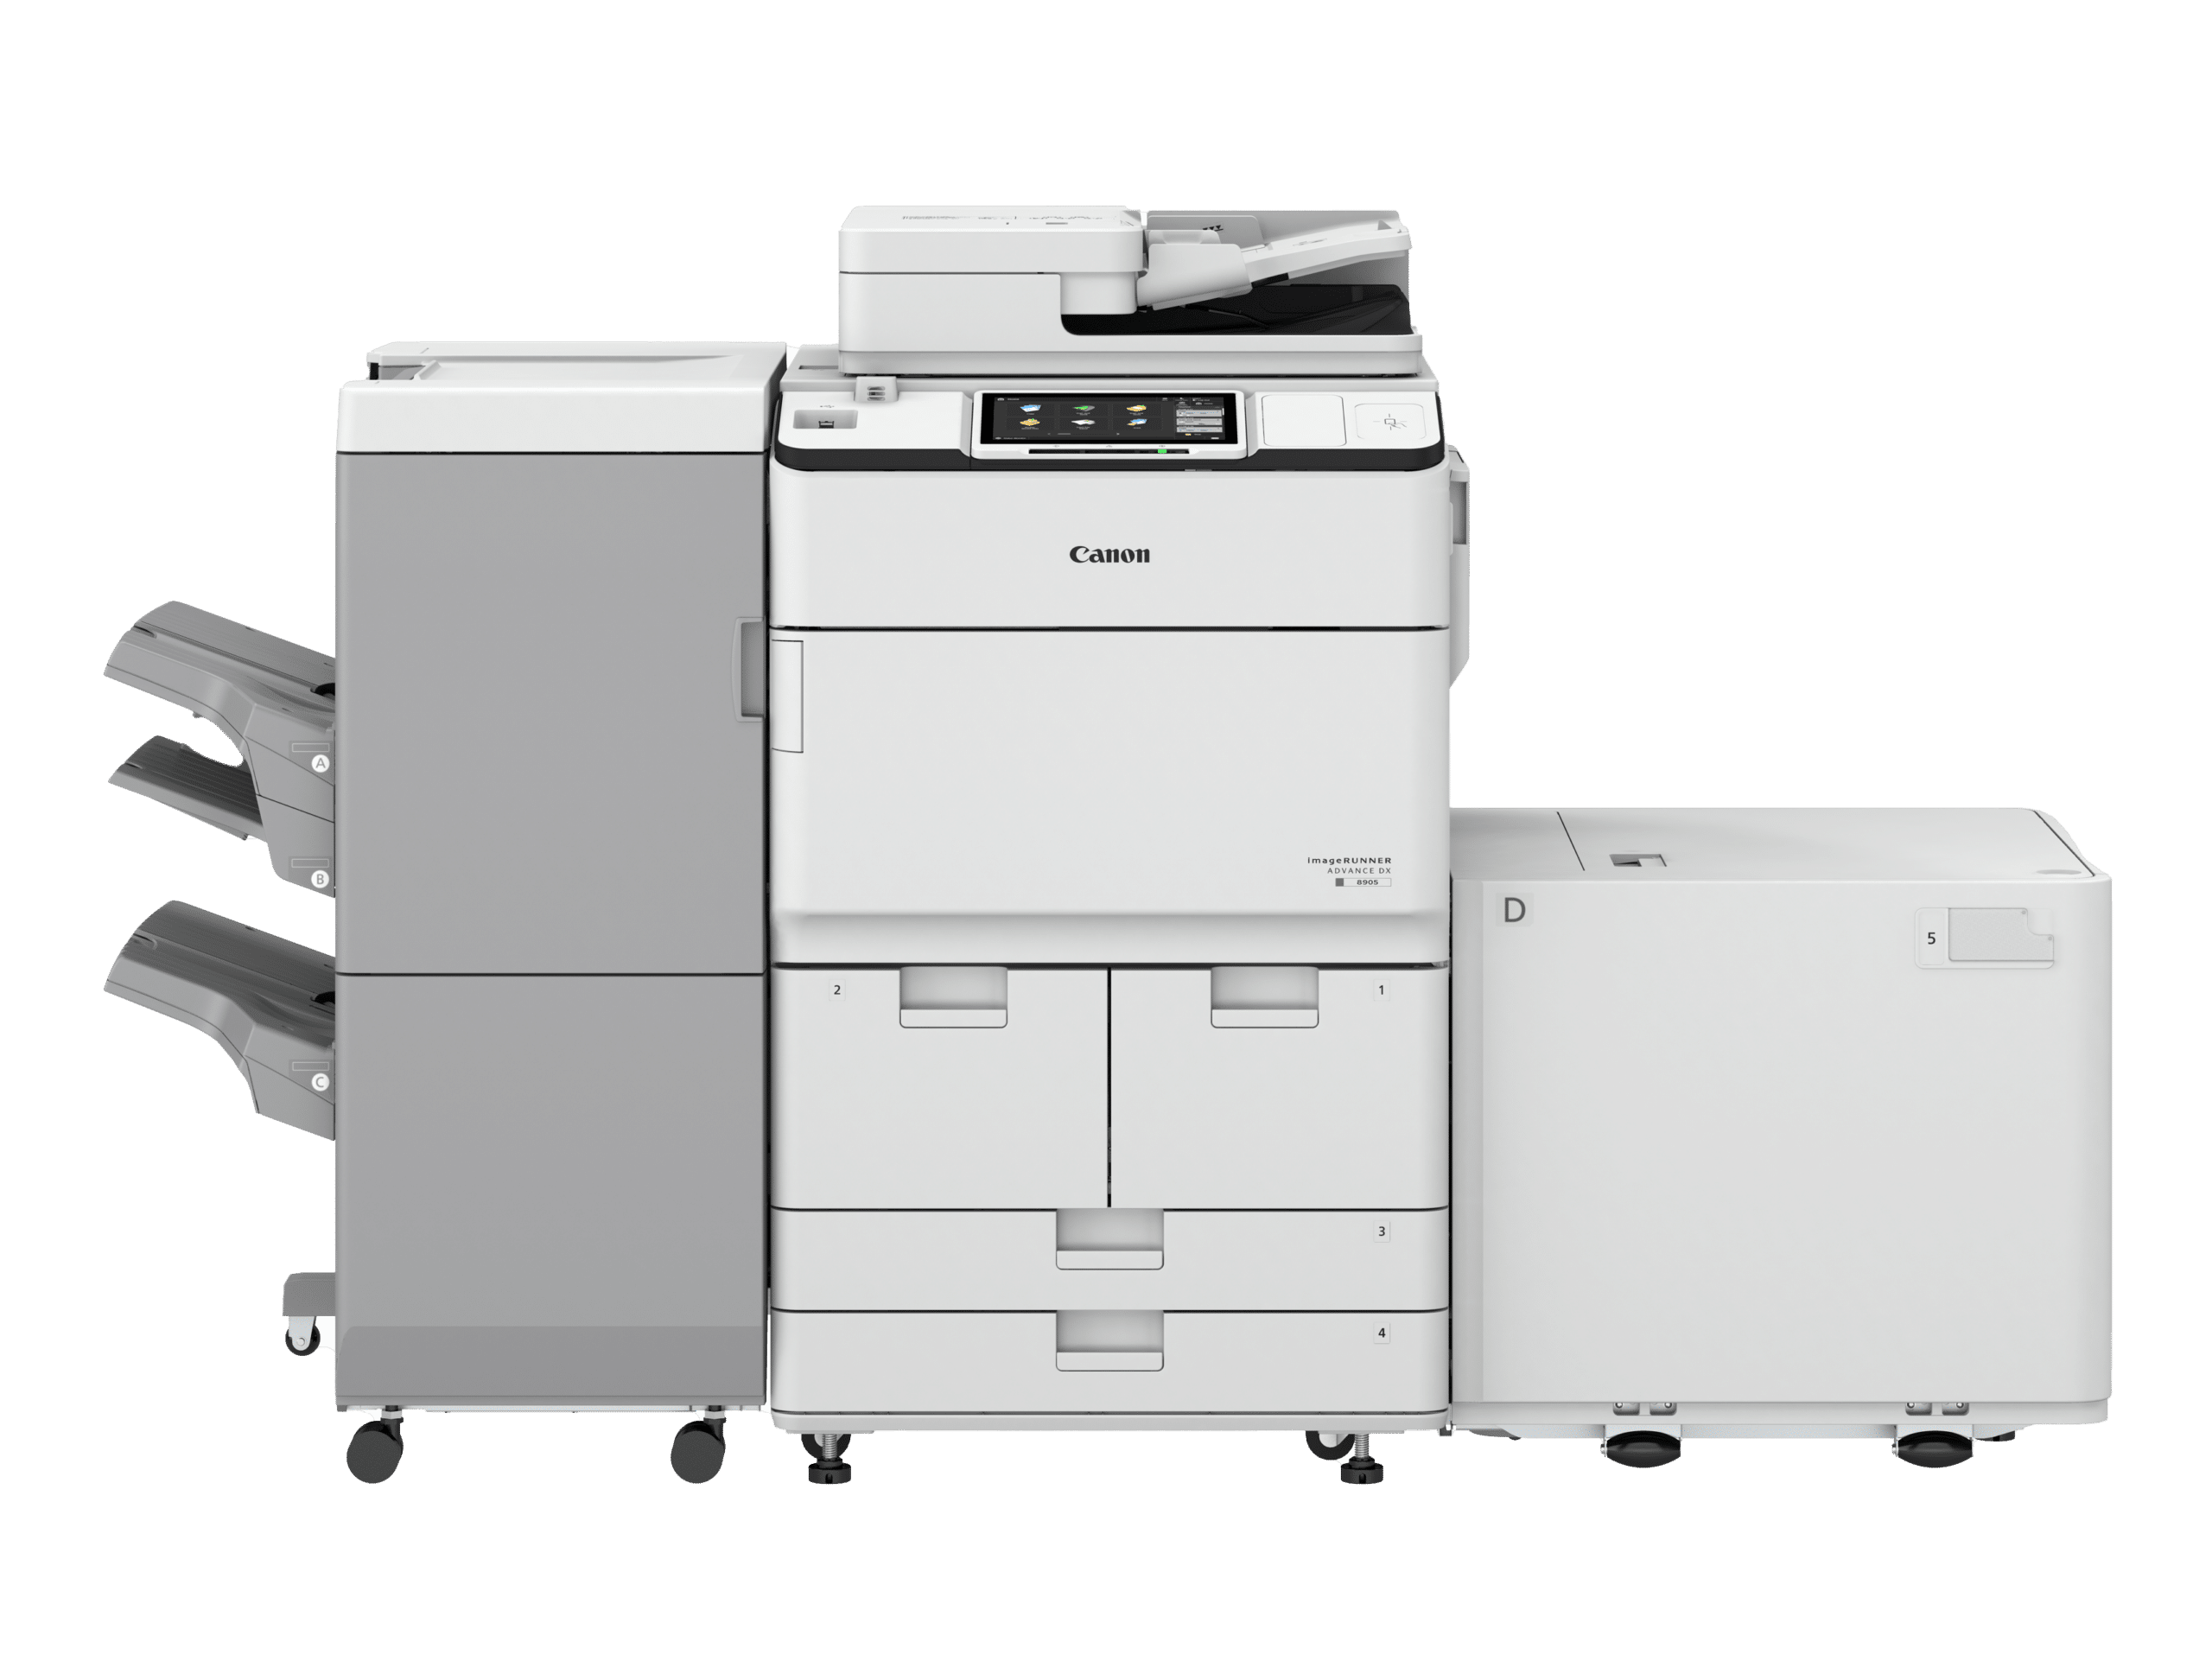 Canon all-in-one printer A3 Zwart/wit imageRUNNER DX 89xx series